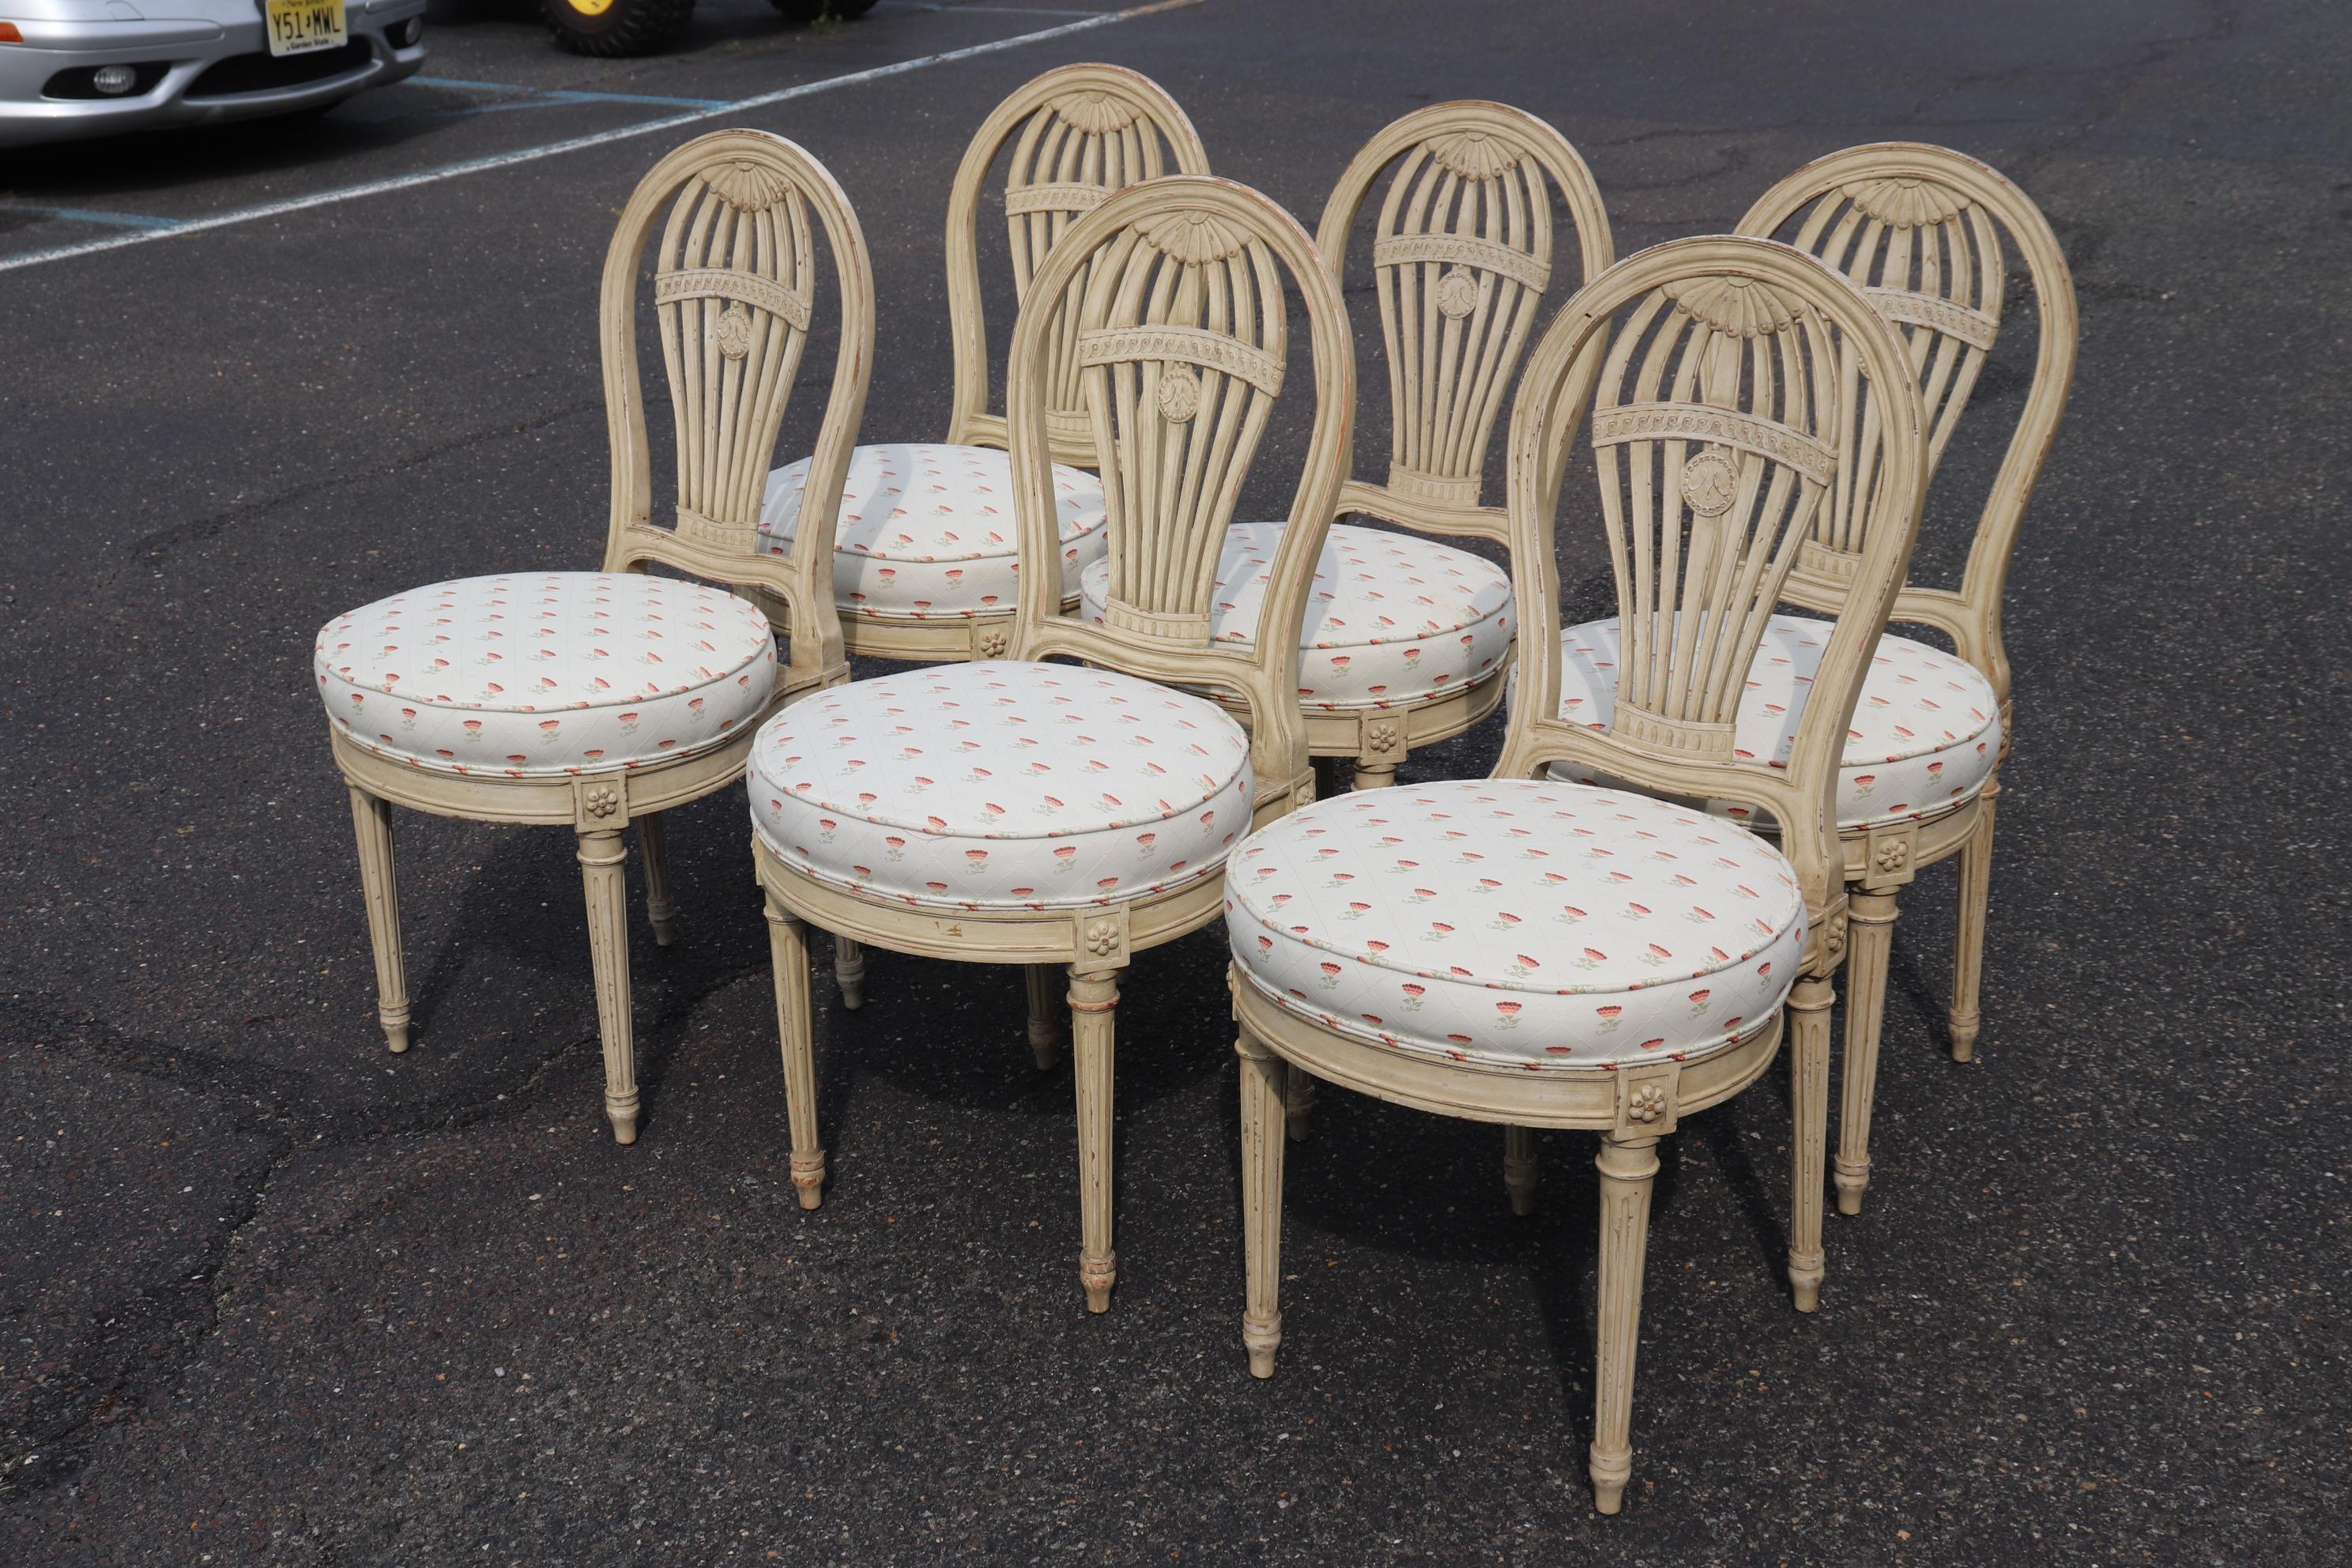 This is a gorgeous set of signed Maison Jansen dining chairs in antique white in good condition. The upholstery and the finish are in good condition with no major issues of any kind. The chairs date to the 1940s and measure 36 tall x 22 wide x 18